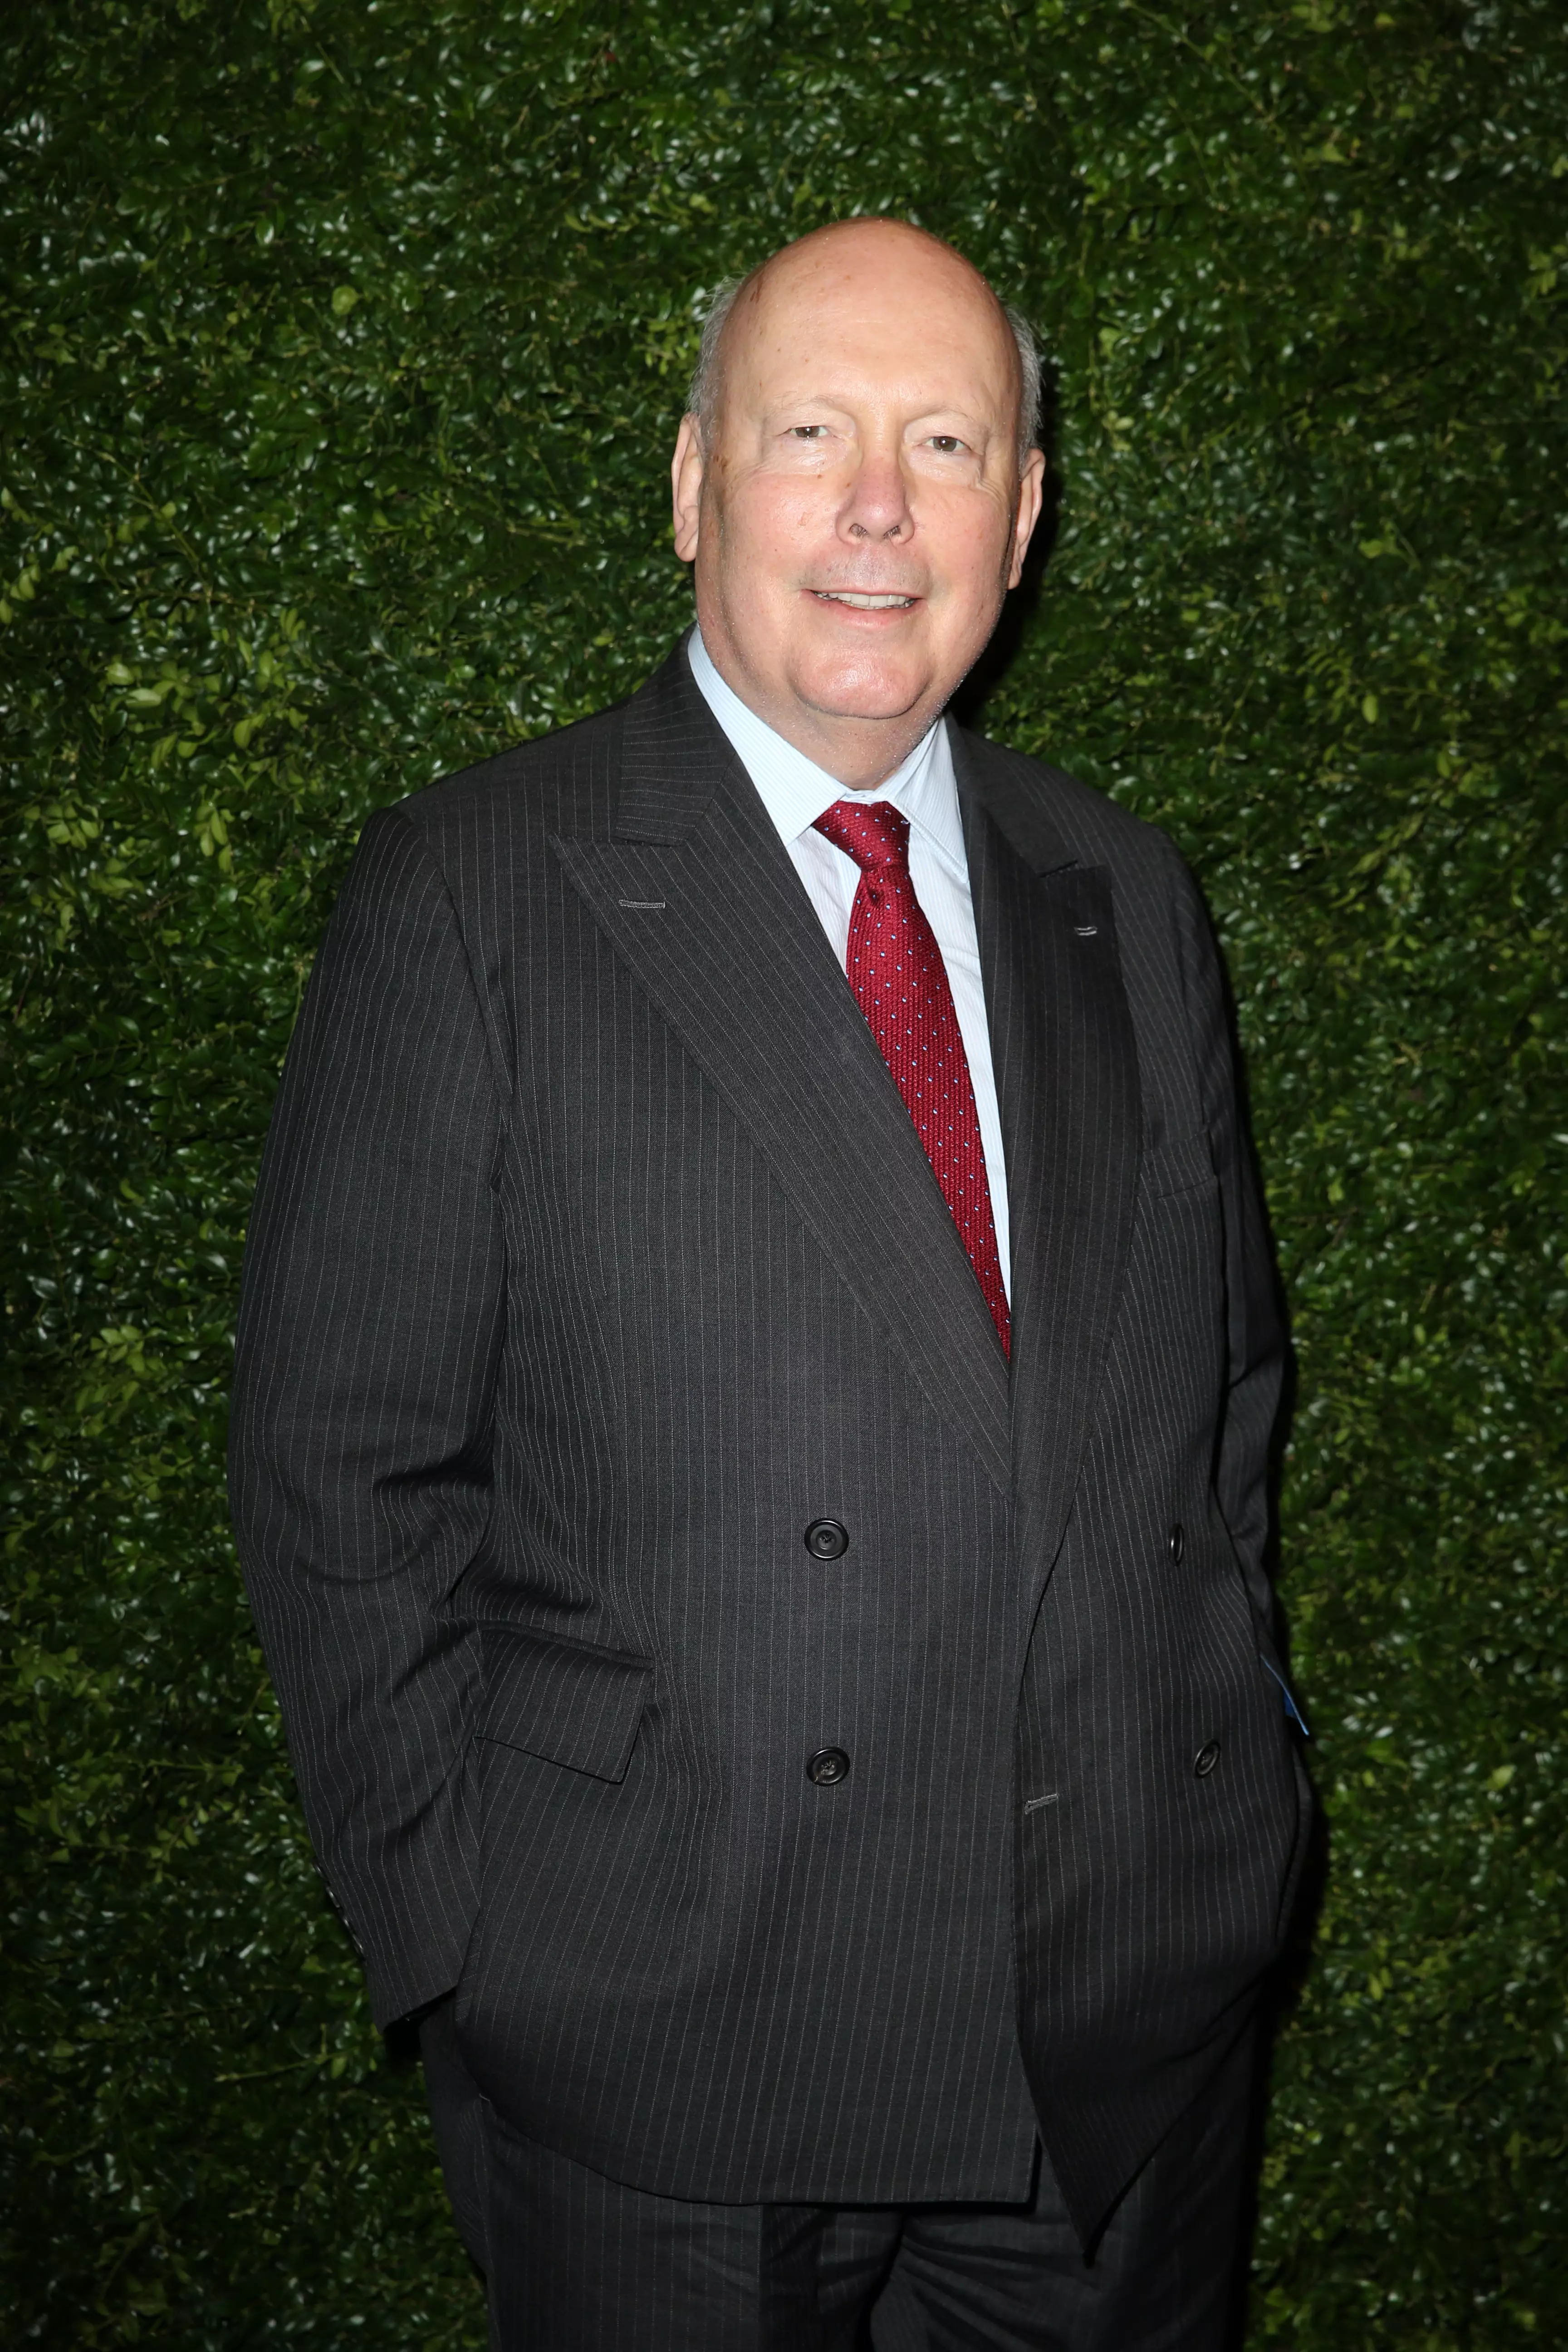 The Downton Abbey creator Julian Fellowes is set to write the screenplay (